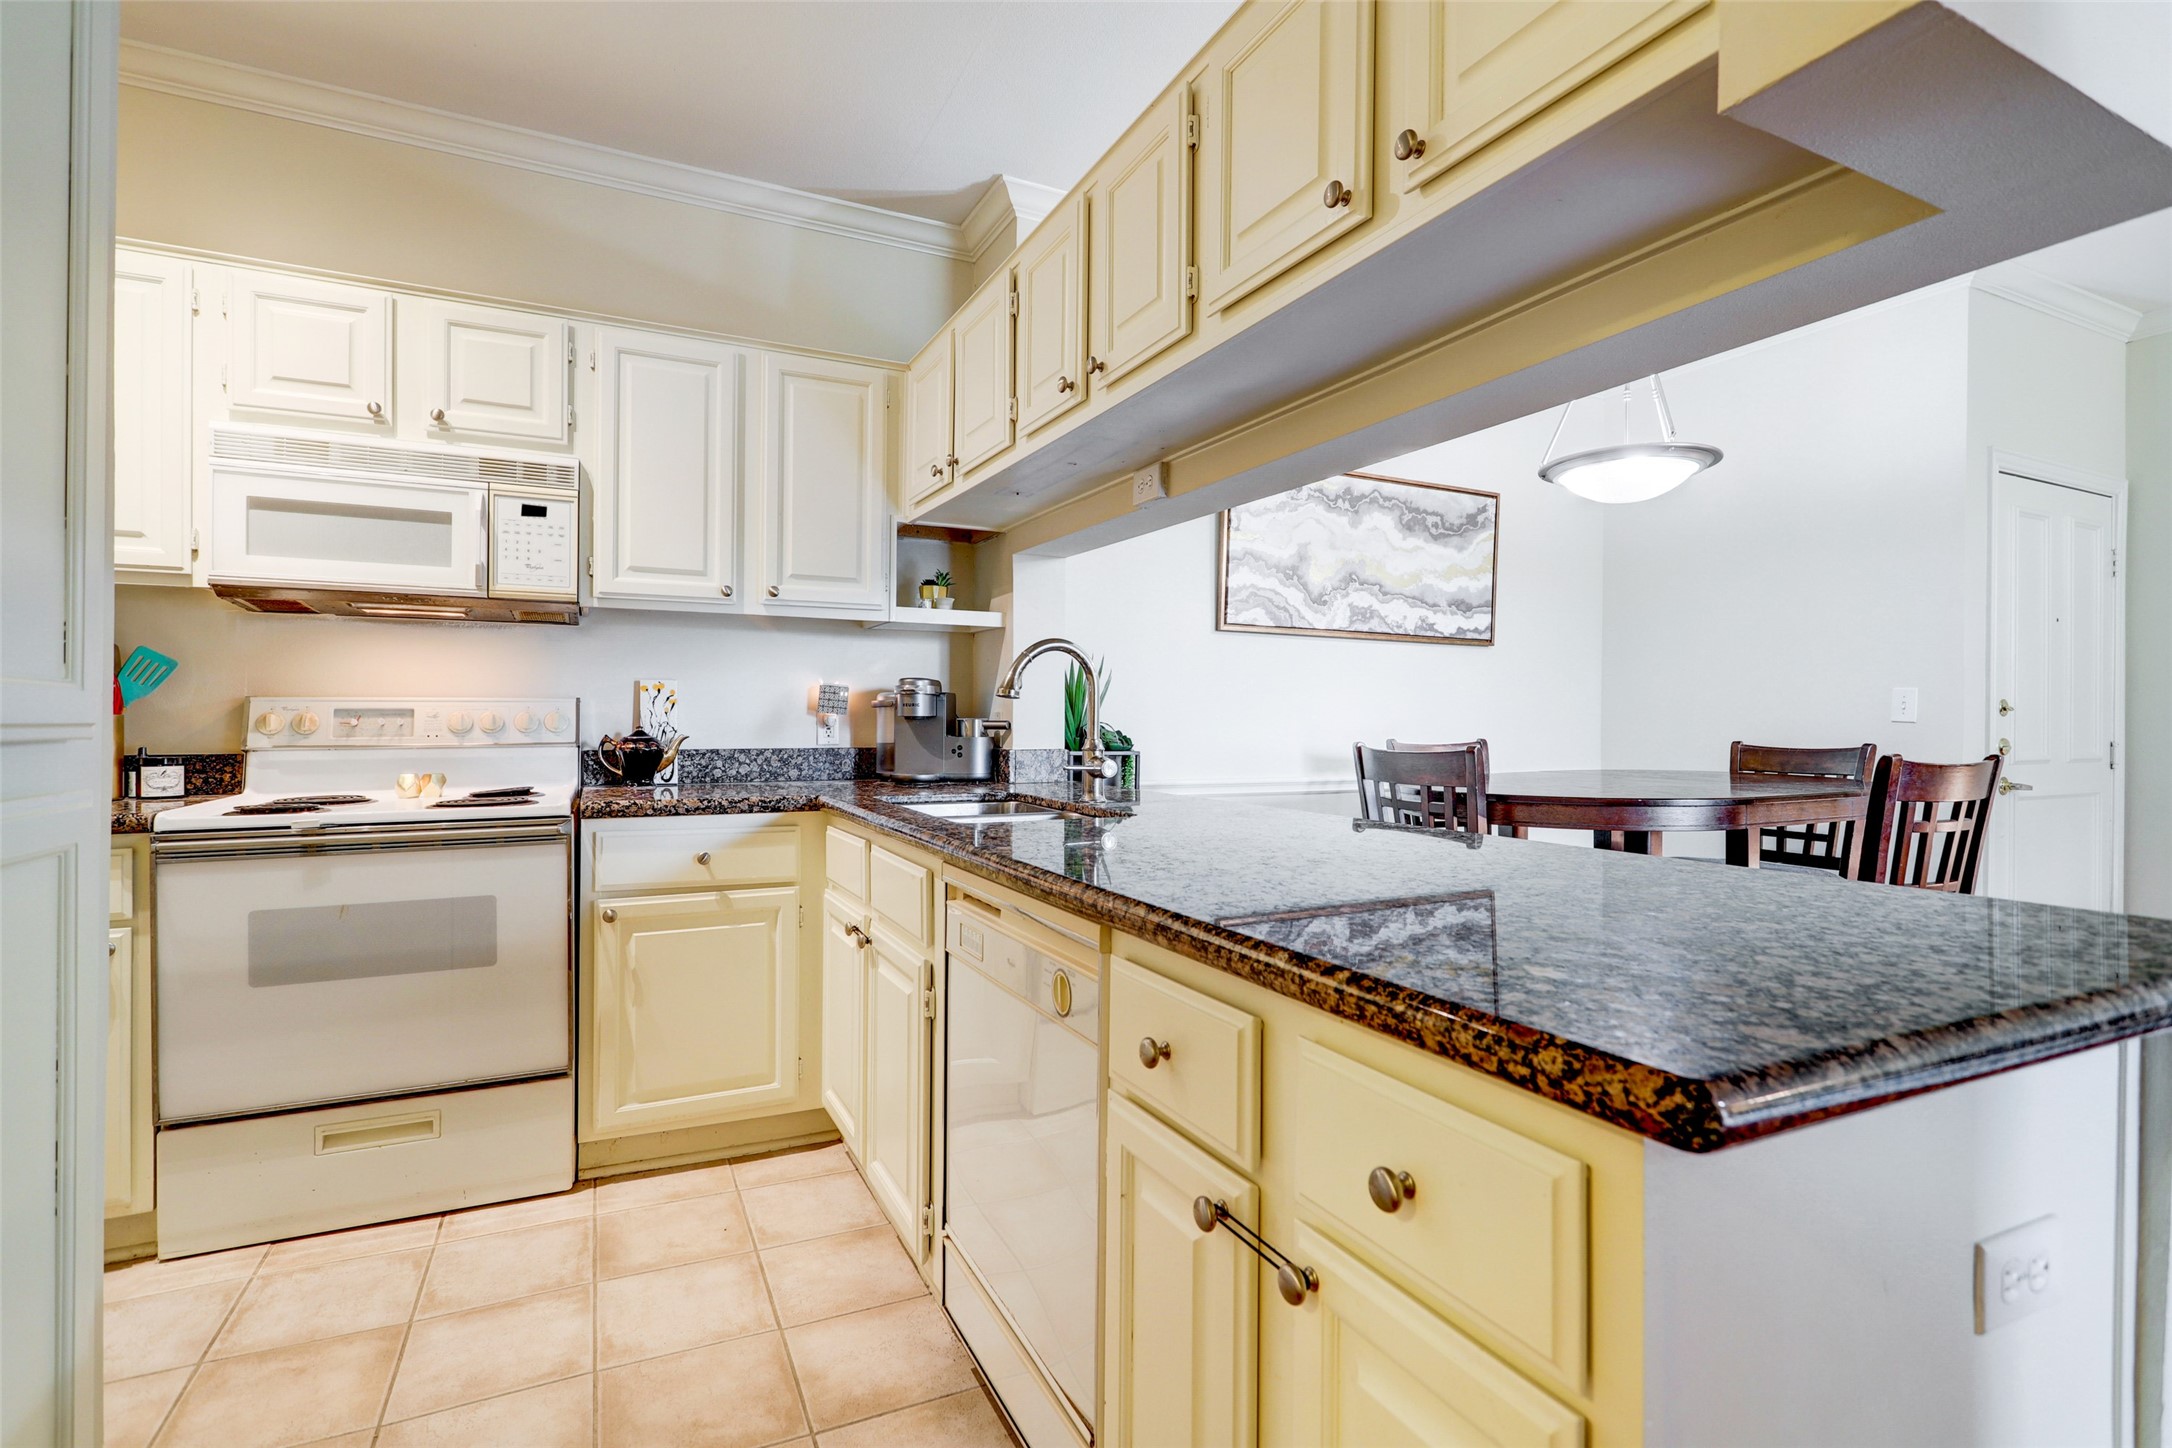 Kitchen has lots of storage, granite counter tops with plenty of room to use as a buffet.